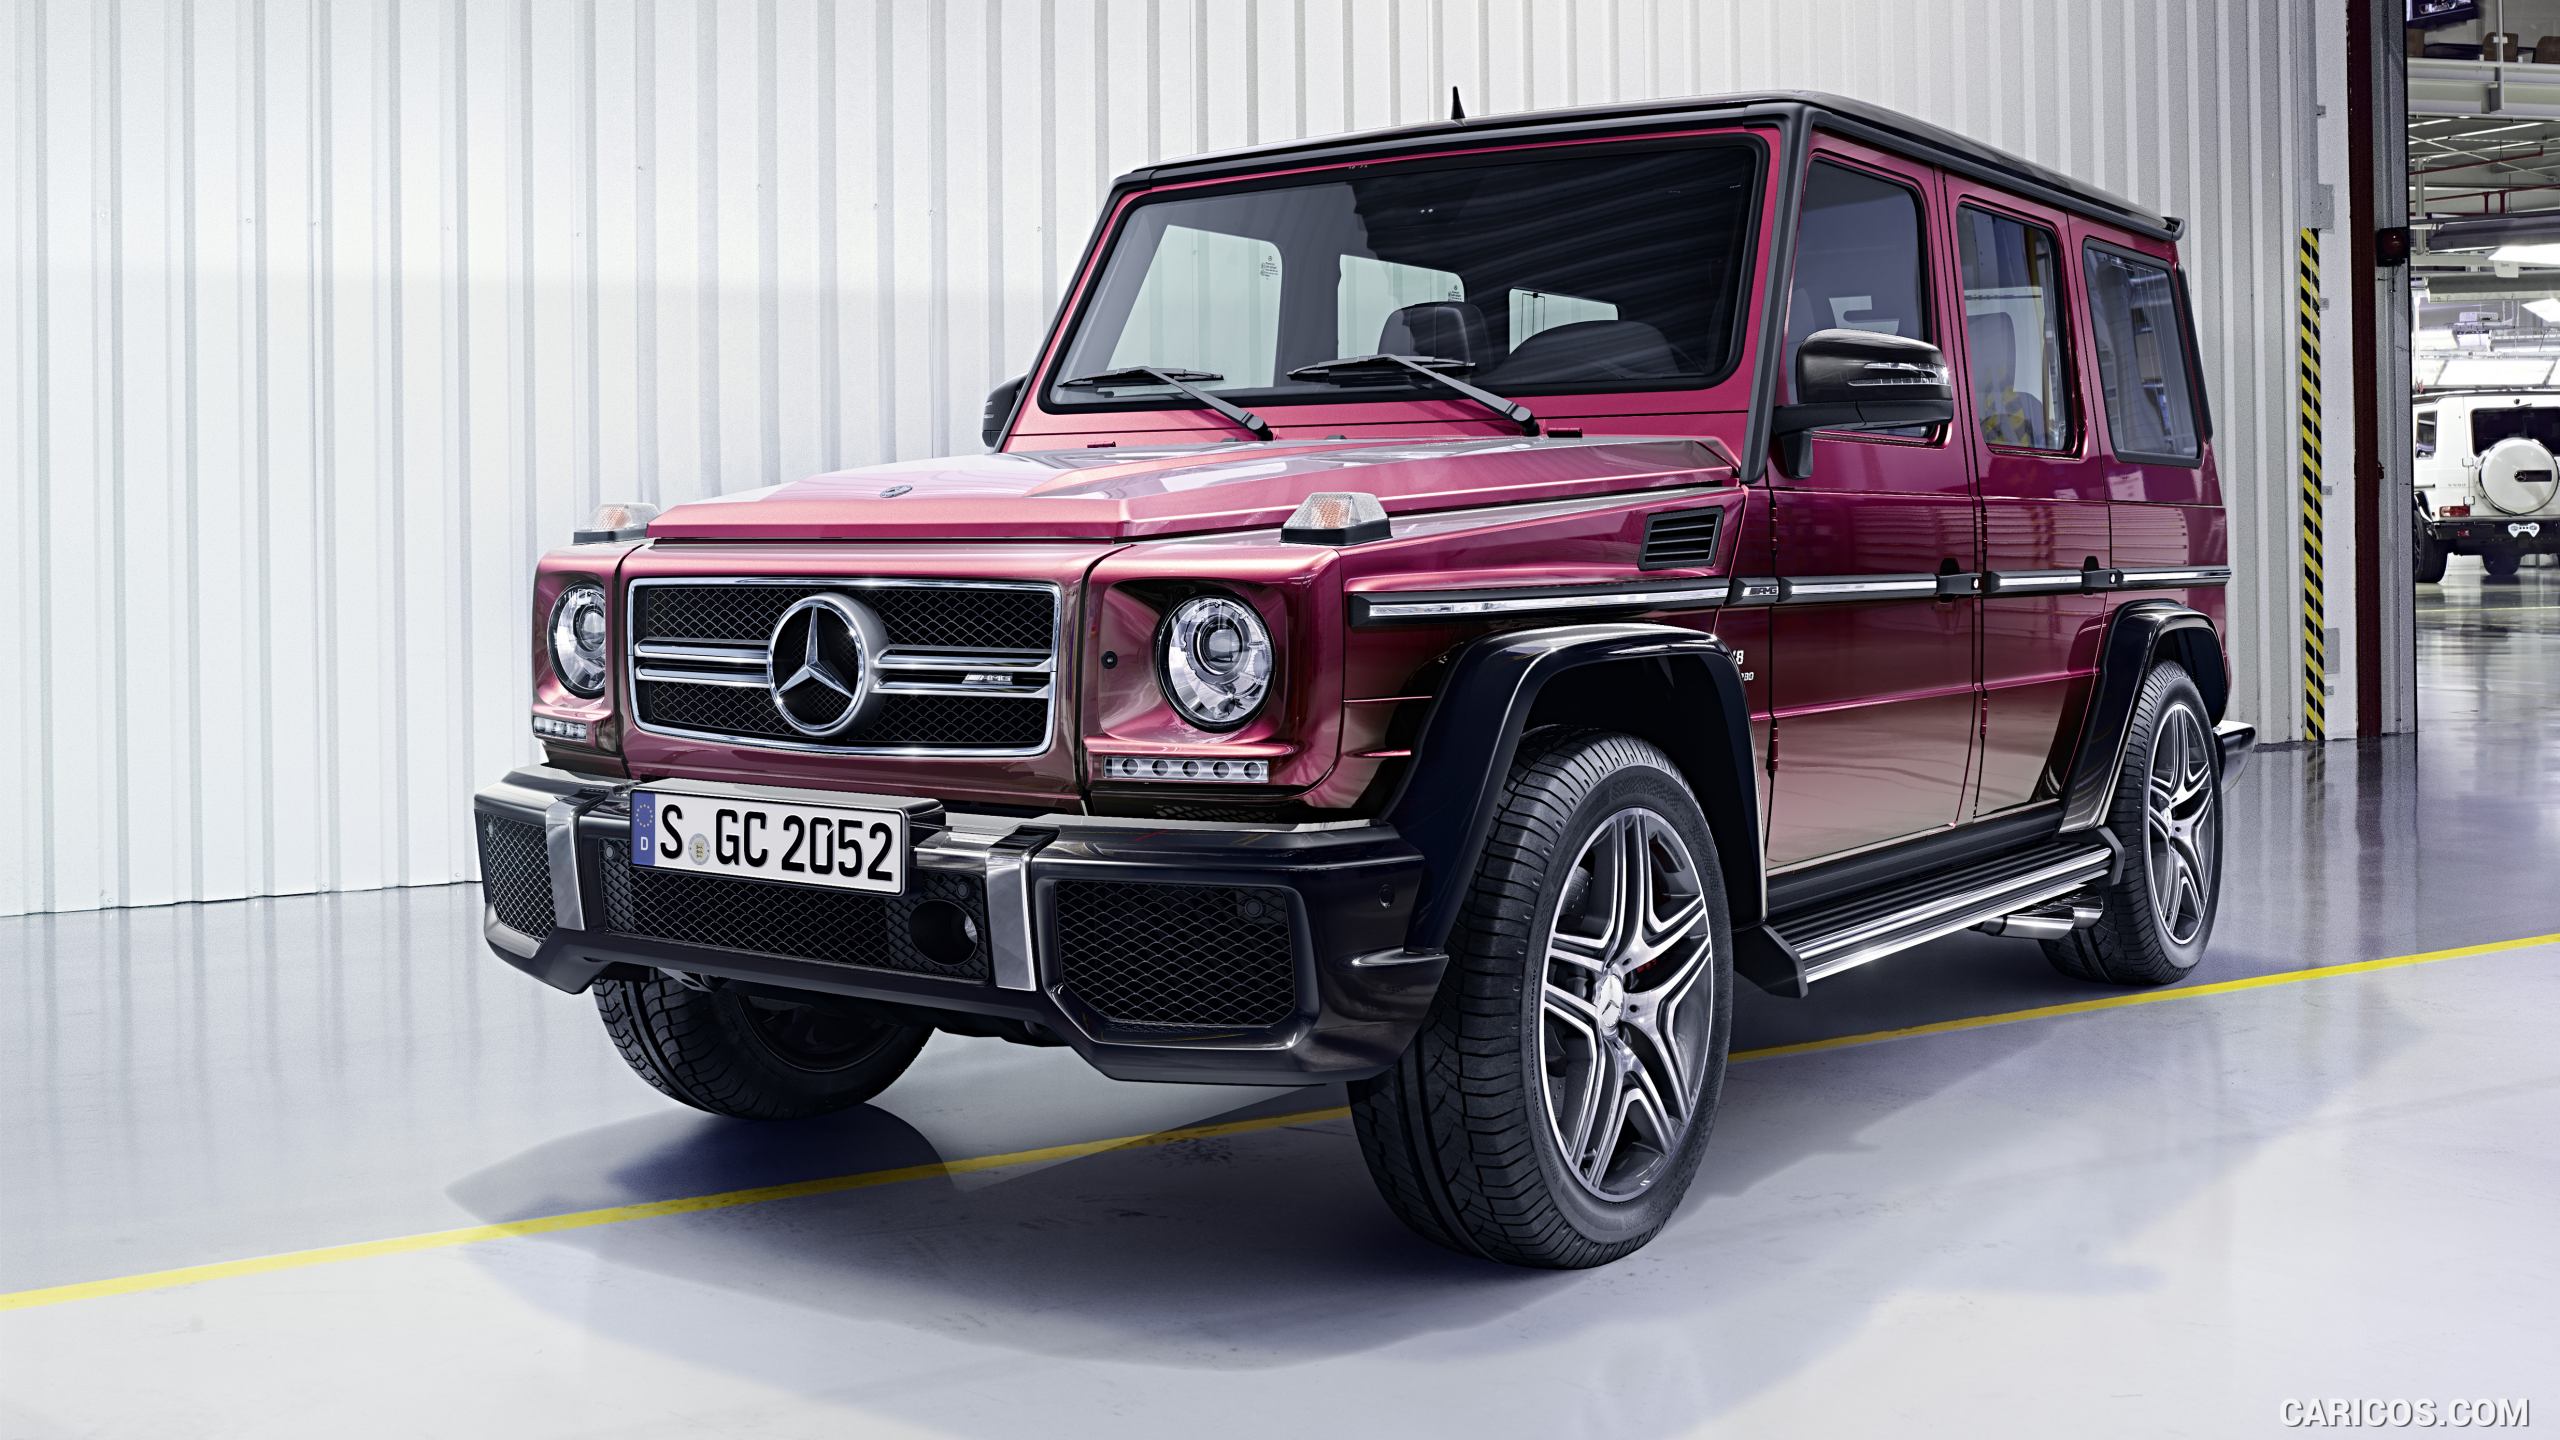 2016 Mercedes-AMG G63 (Galactic Beam) - Front, #10 of 48